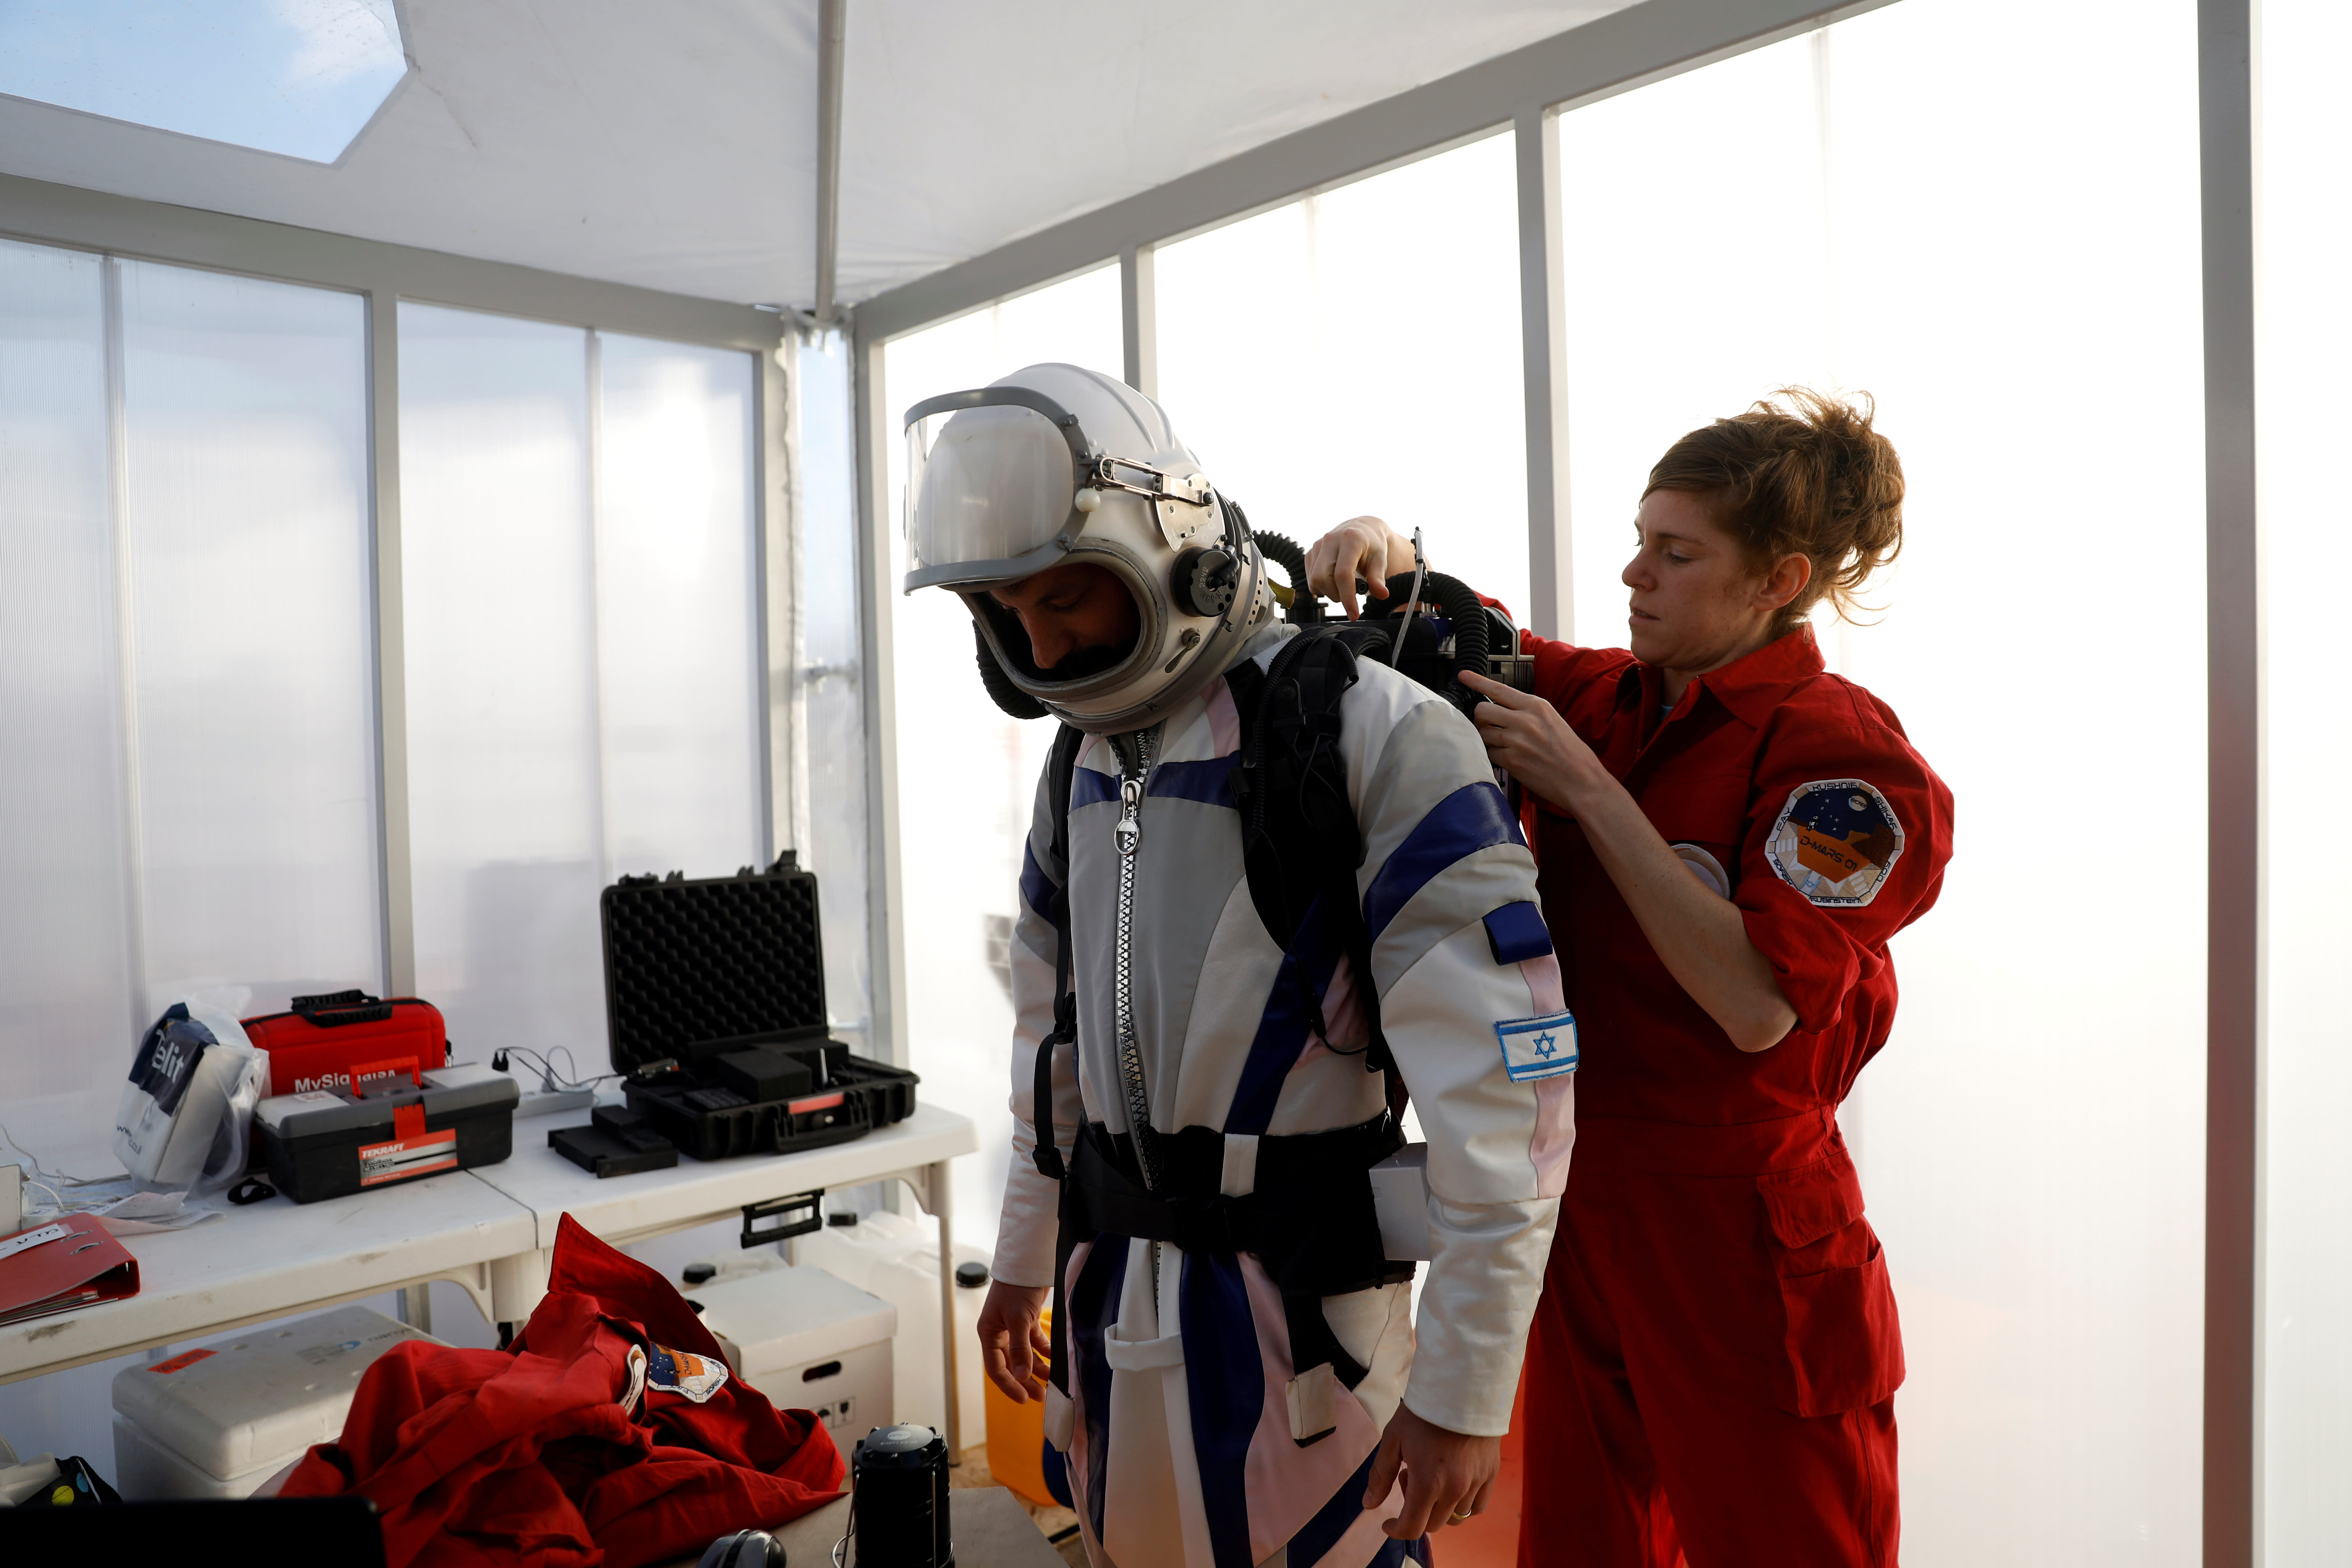 Israeli scientists participate in an experiment simulating a mission to Mars, at the D-MARS Desert Mars Analog Ramon Station project of Israel's Space Agency, Ministry of Science, near Mitzpe Ramon, Israel (RONEN ZVULUN/REUTERS)